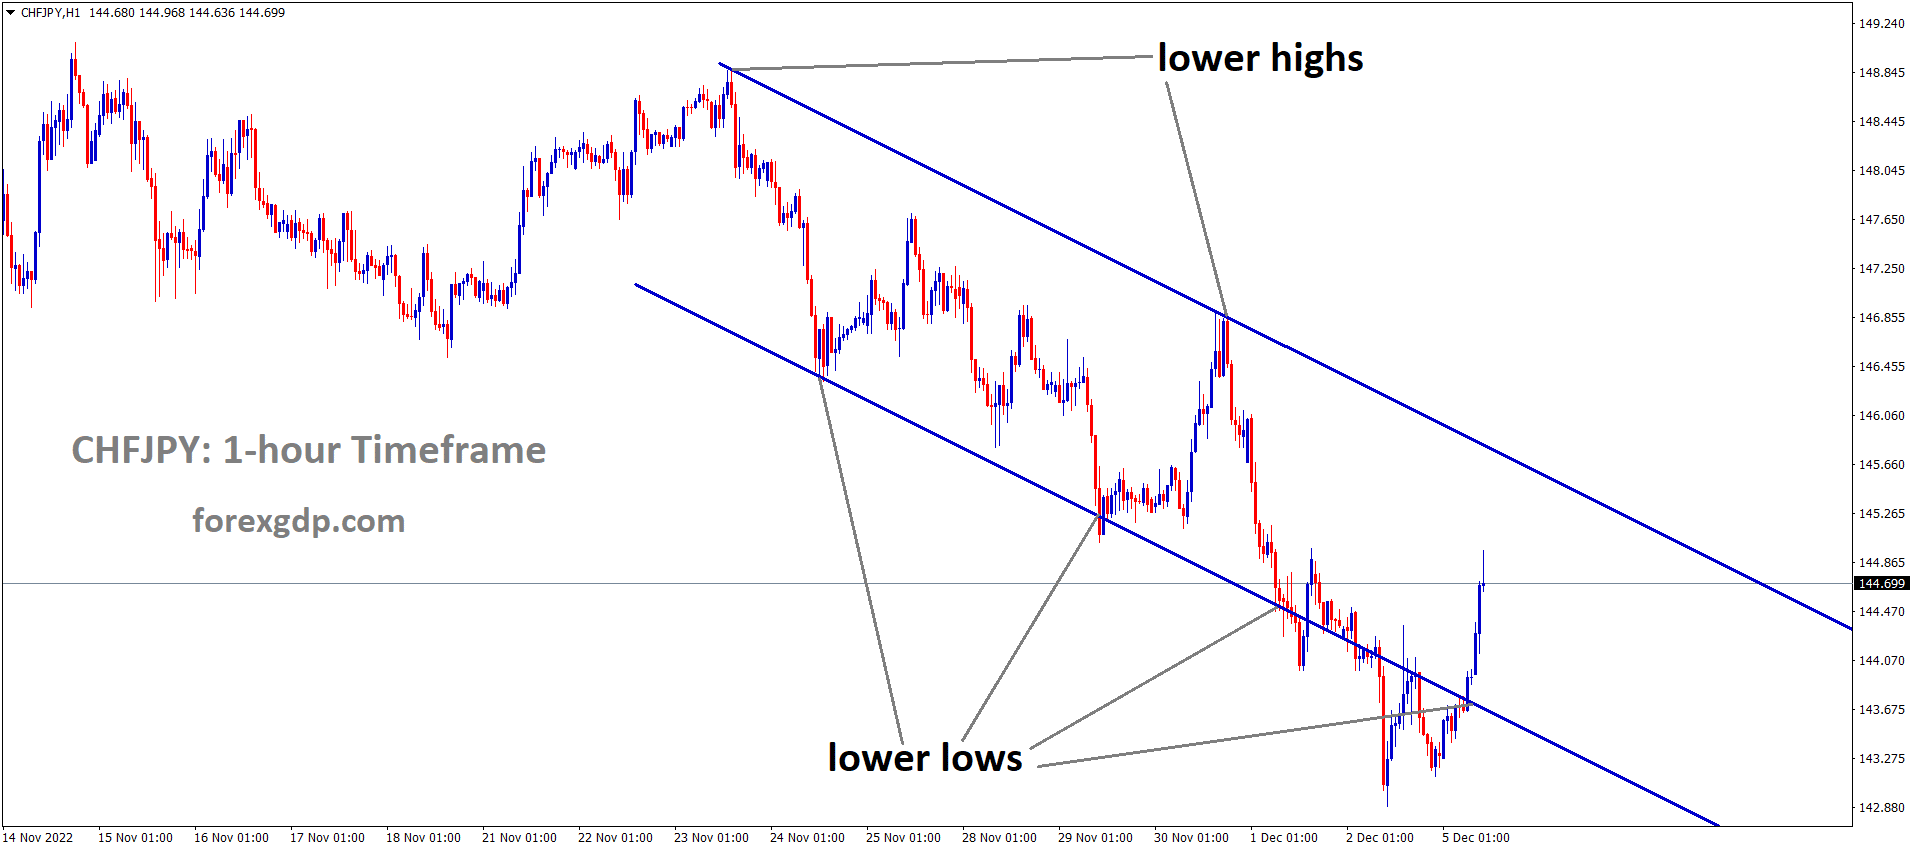 CHFJPY is moving in the Descending channel and the market has rebounded from the lower low area of the channel